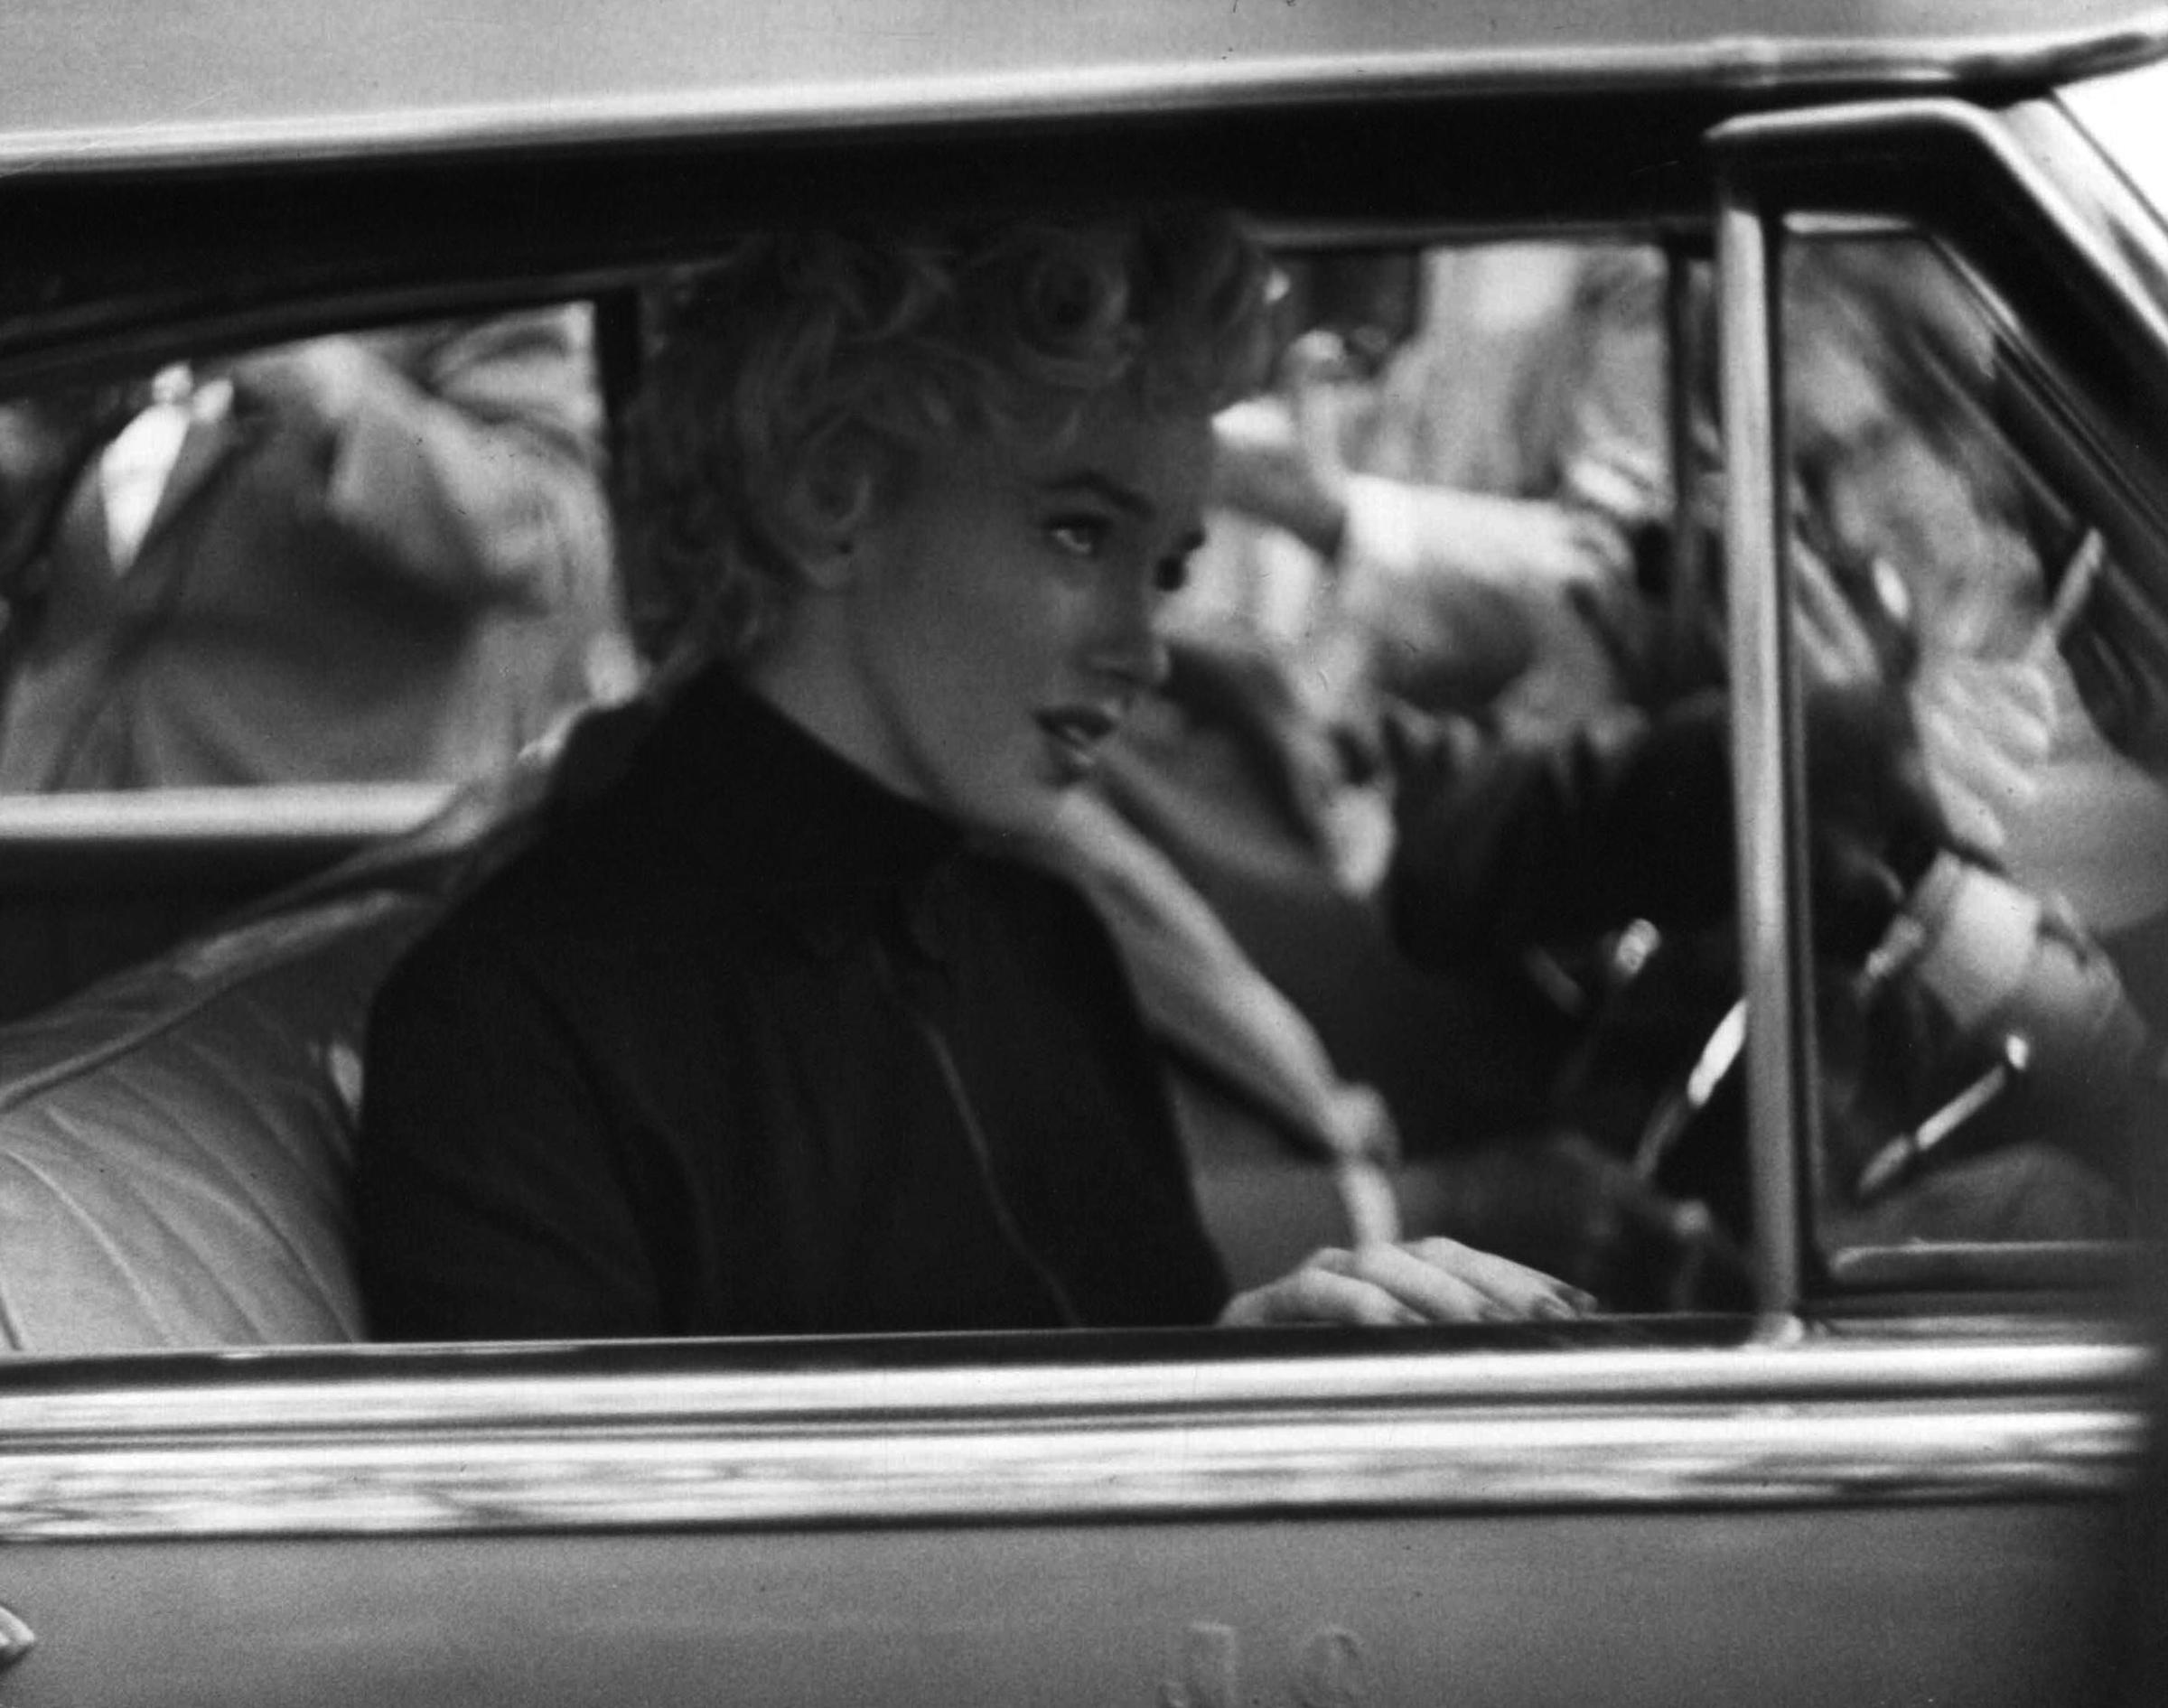 Marilyn Monroe at the time she filed for divorce from Joe DiMaggio, October 1954.